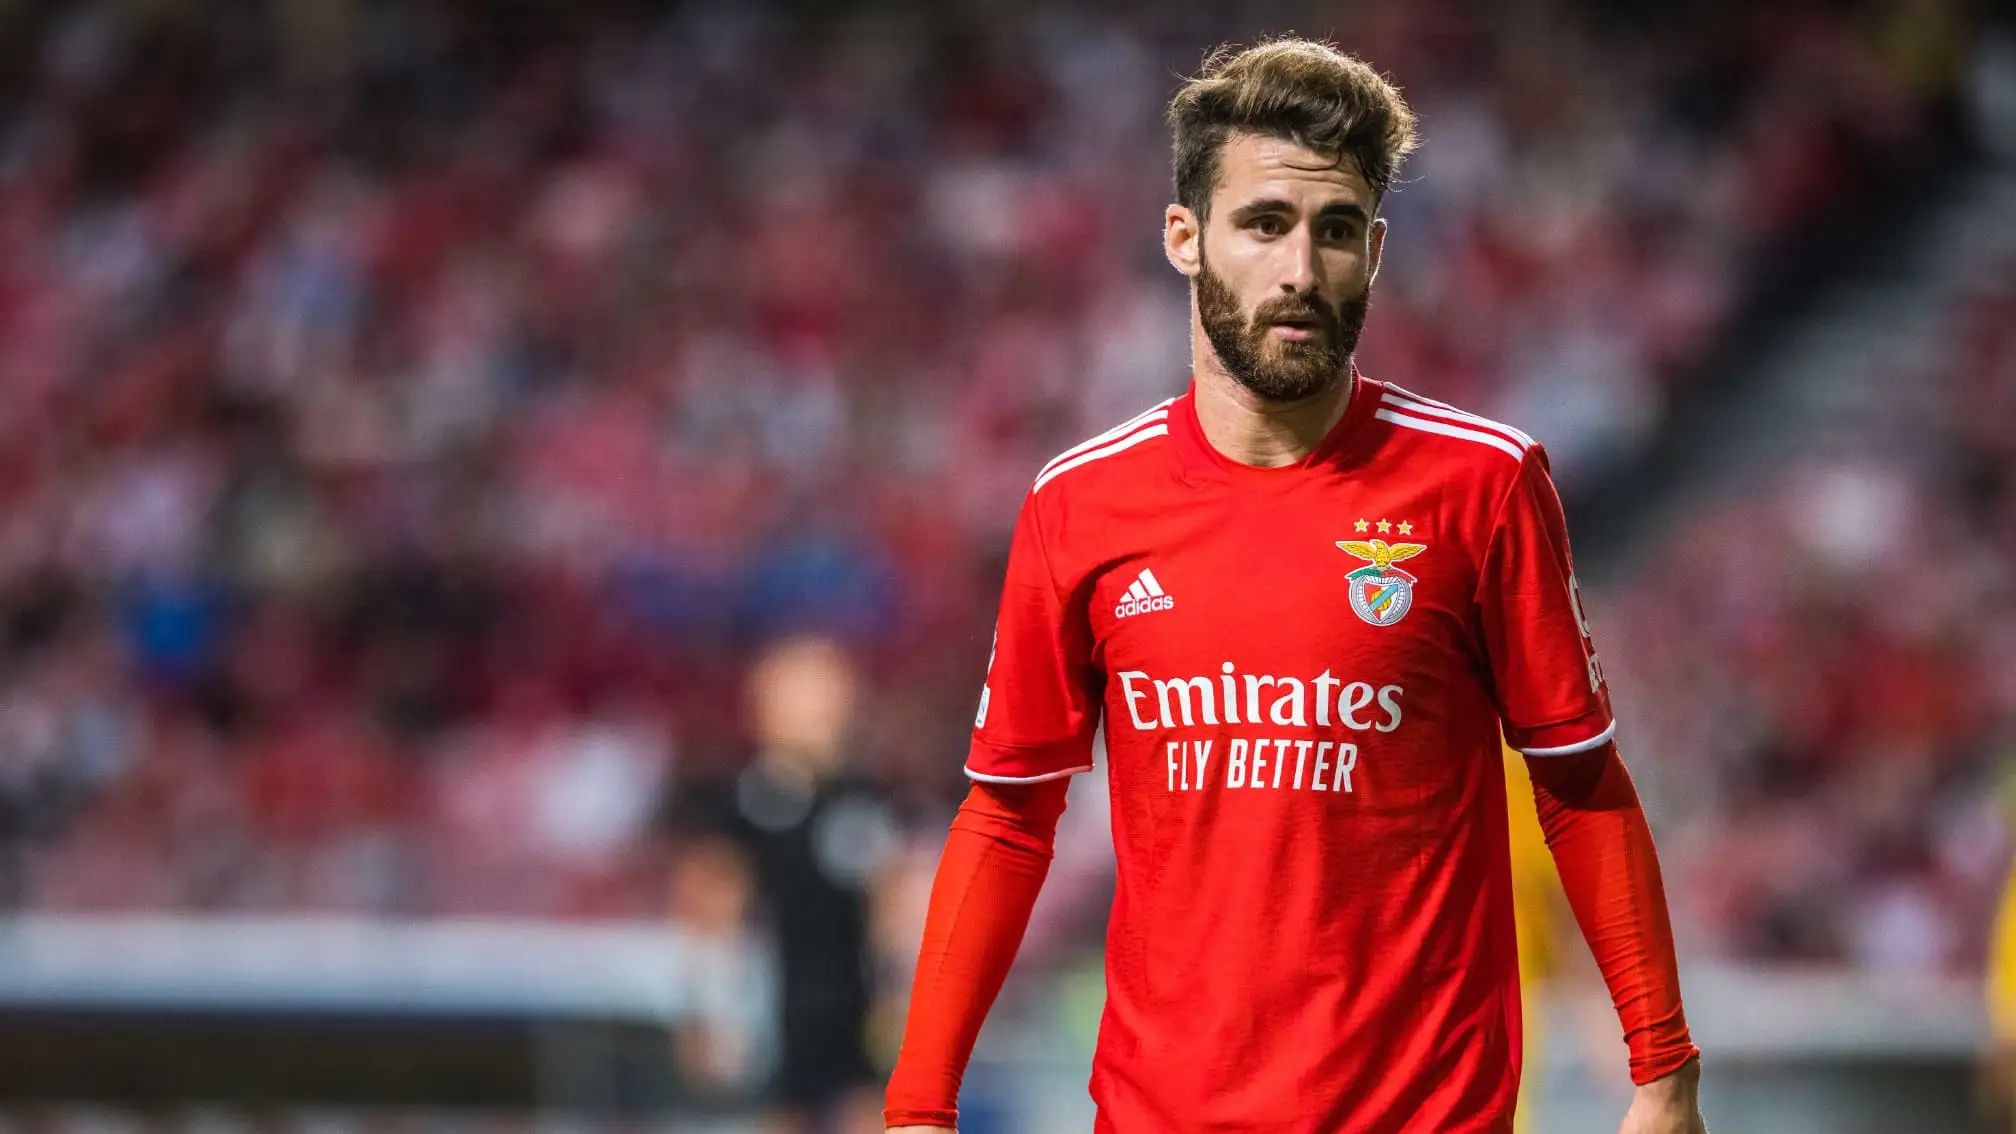 Benfica forward Rafa Silva named the best player of the week in Champions League